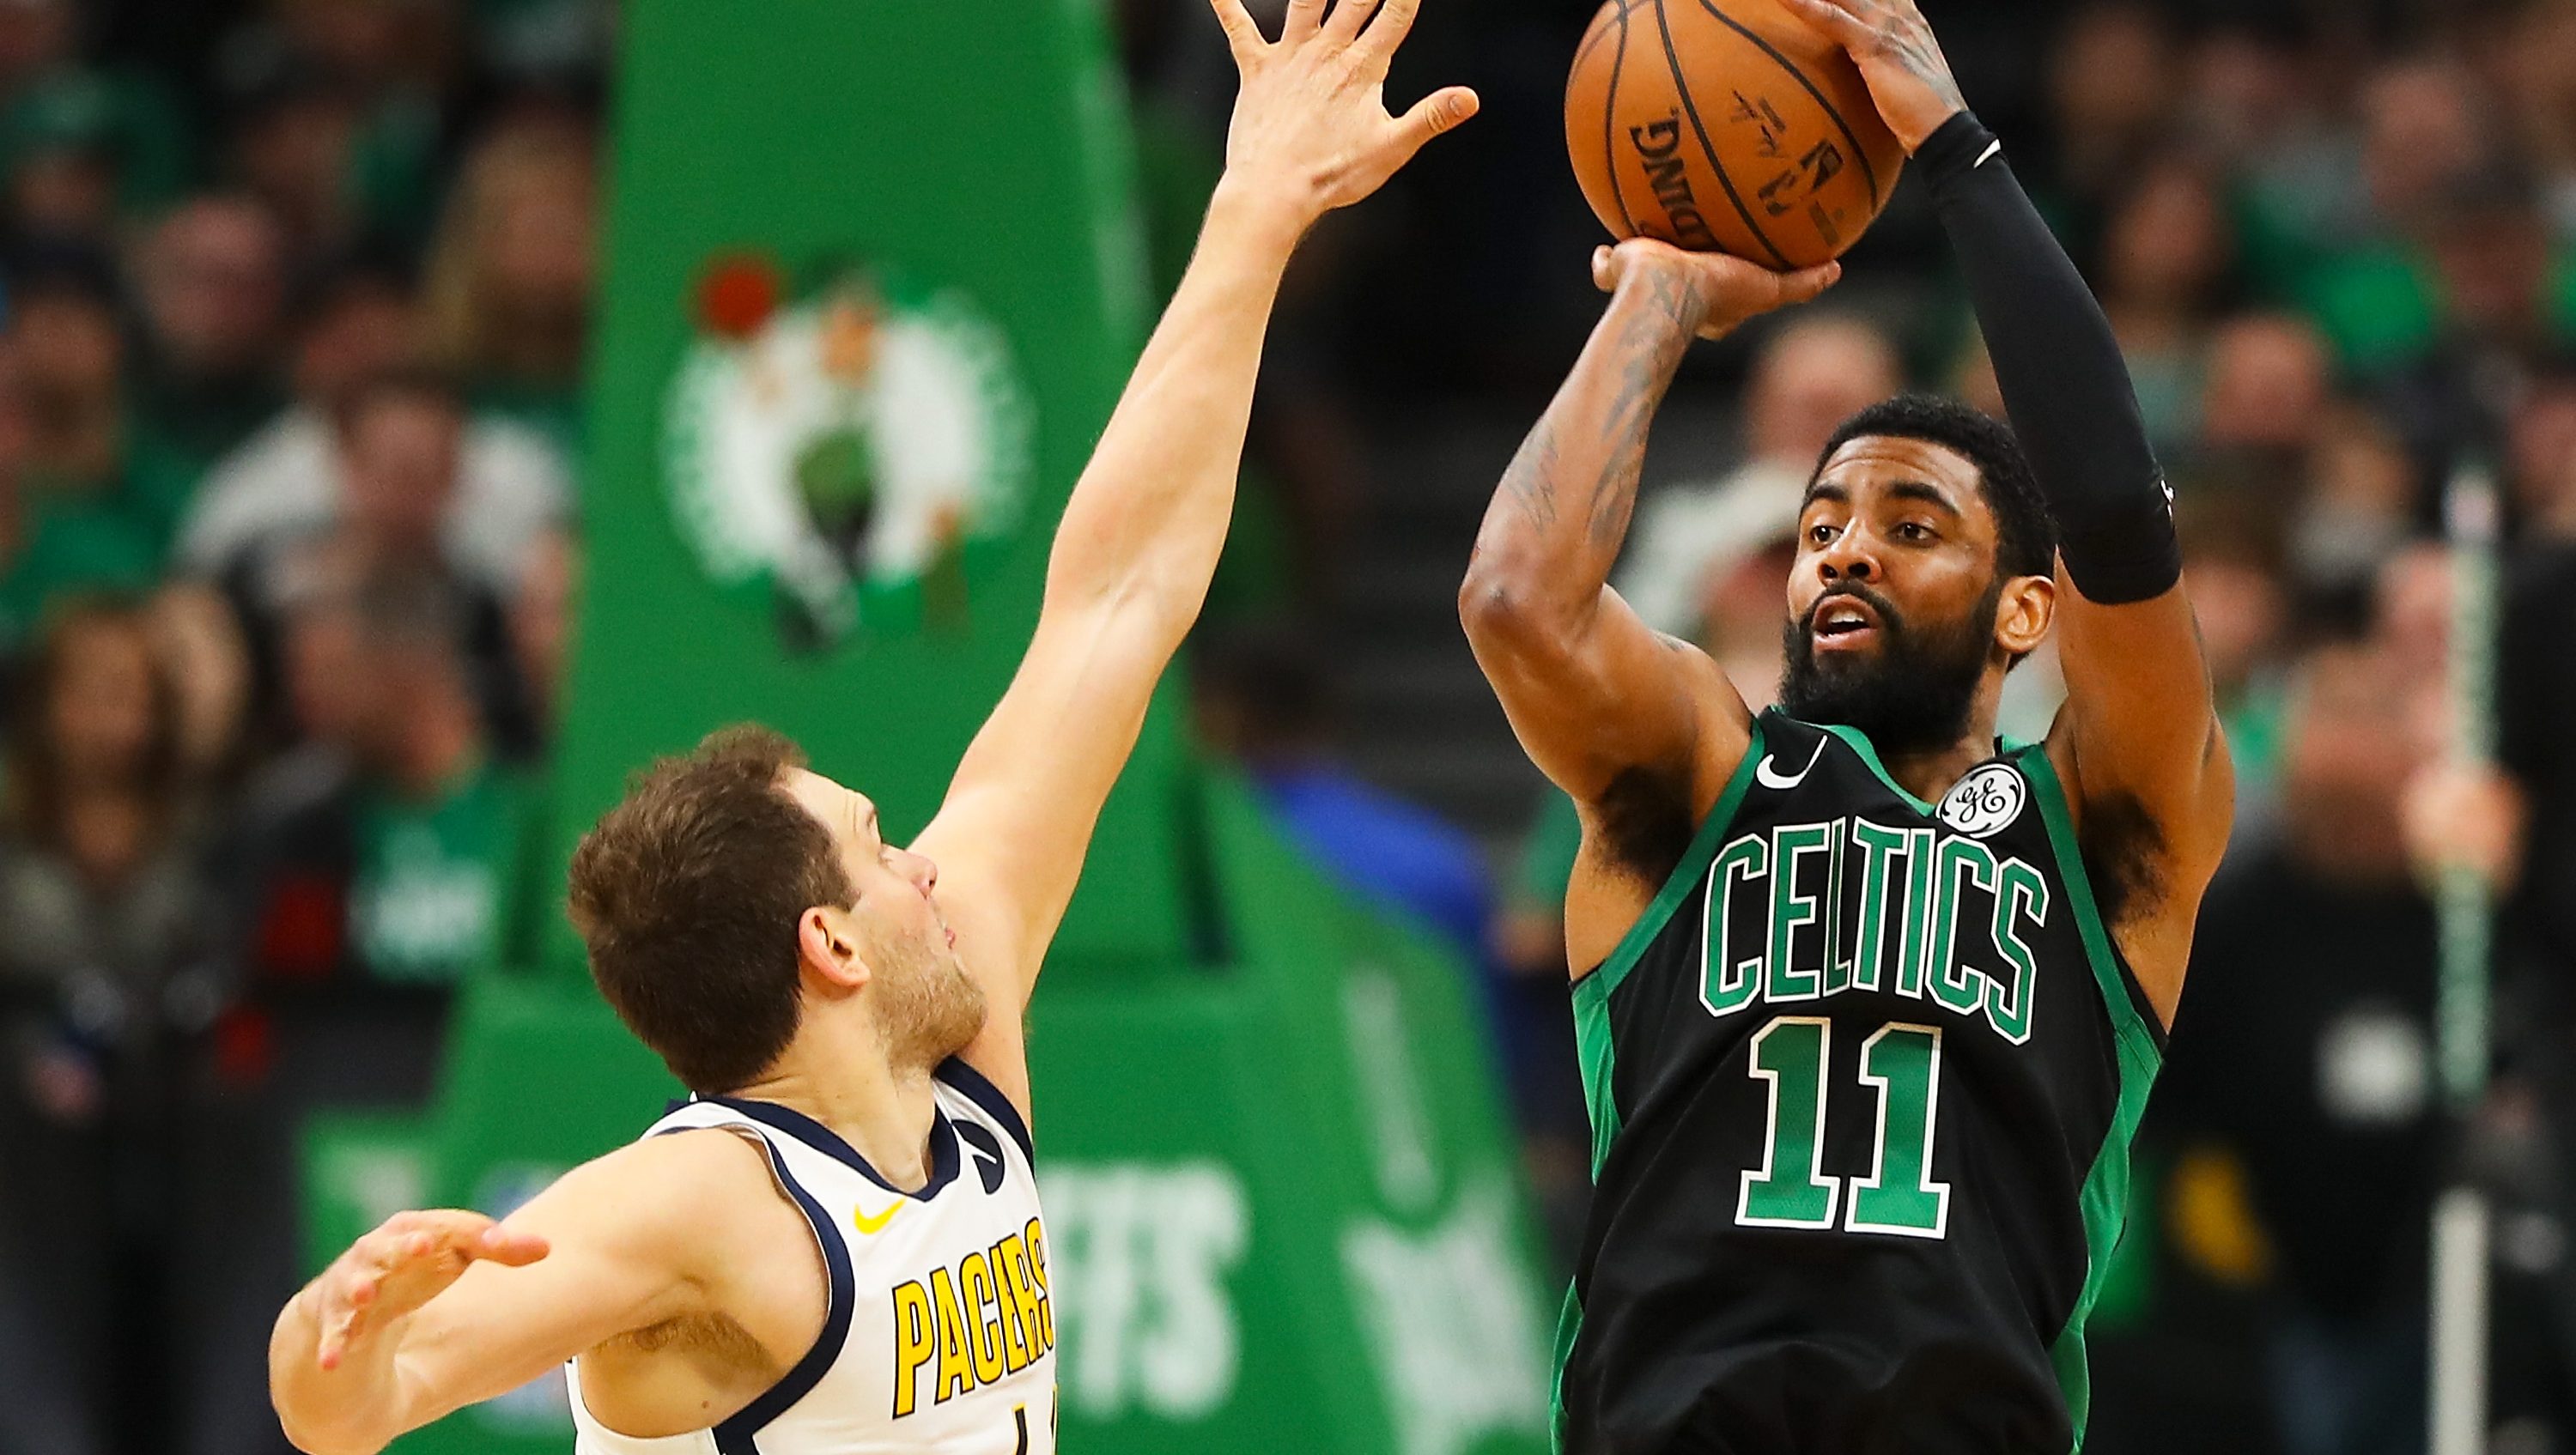 How to Watch Pacers vs Celtics Game 2 Online